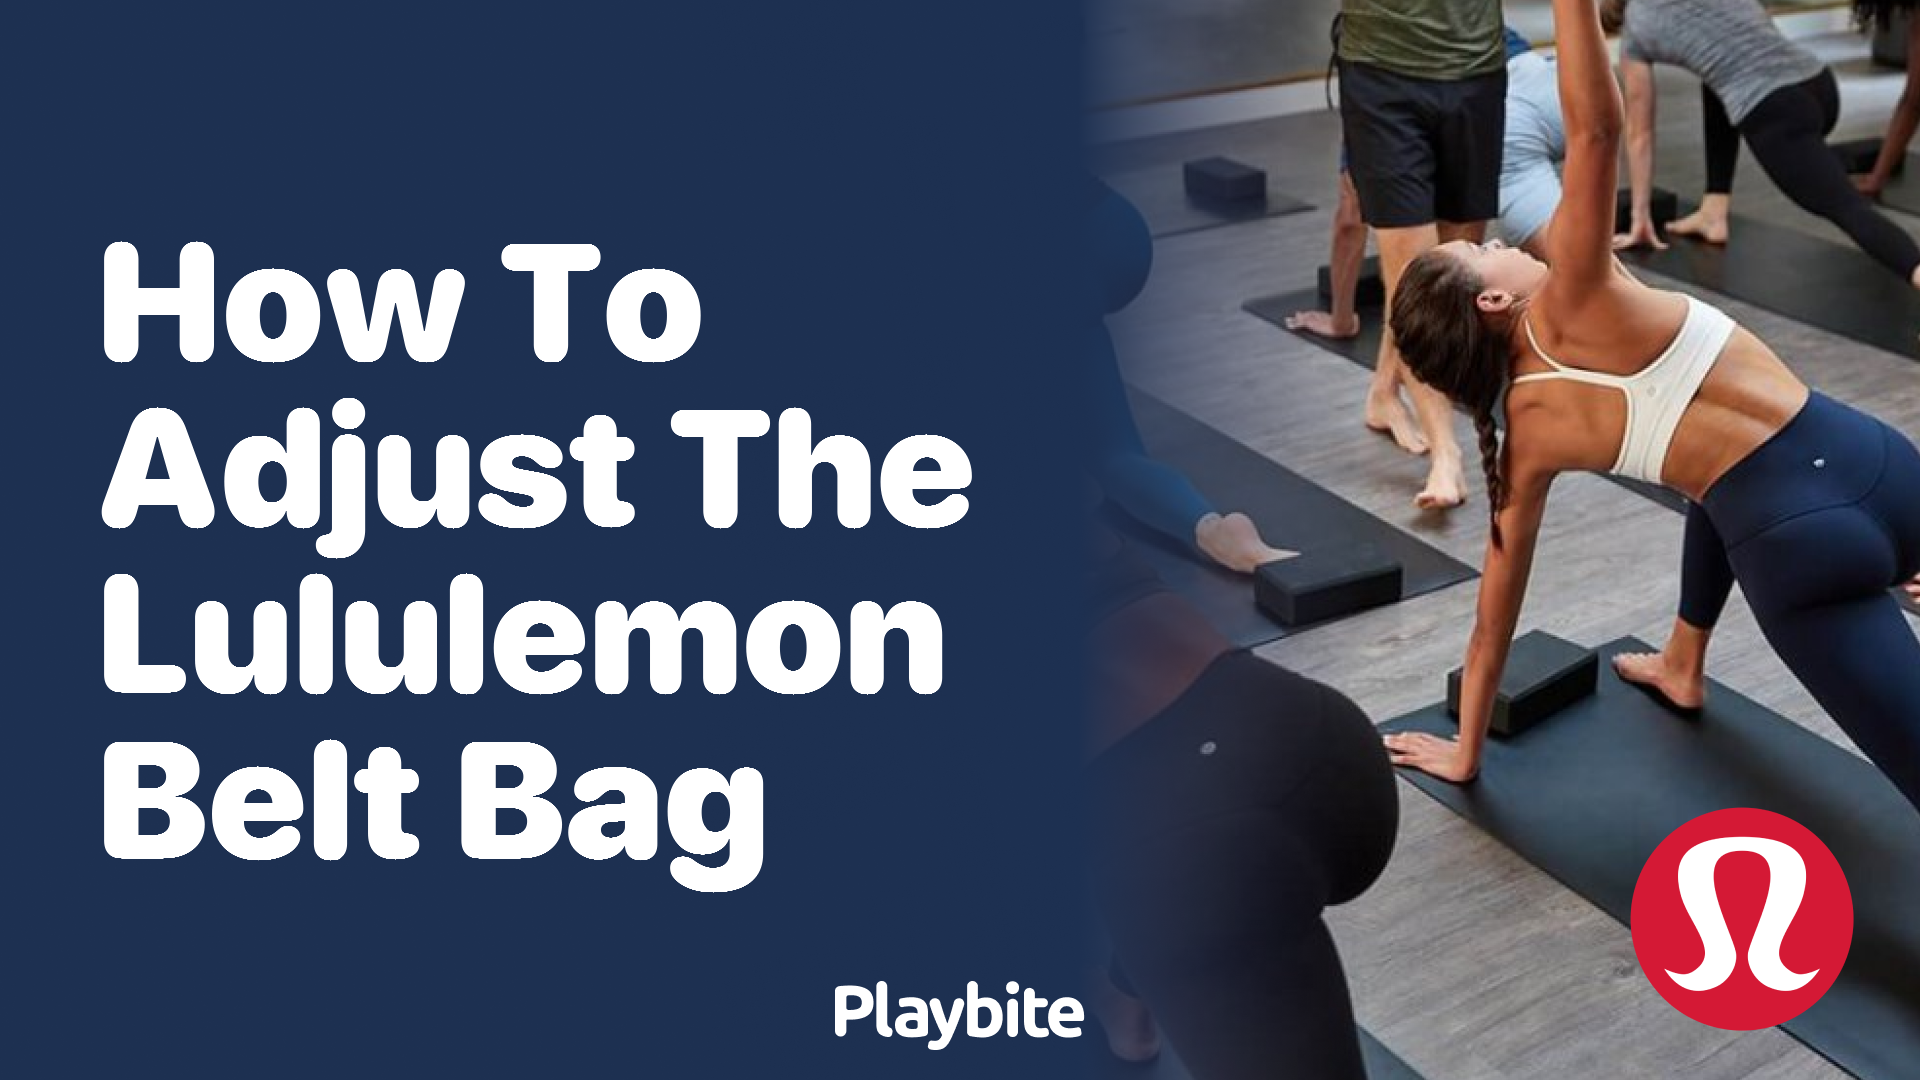 How to Adjust the Lululemon Belt Bag for a Perfect Fit - Playbite